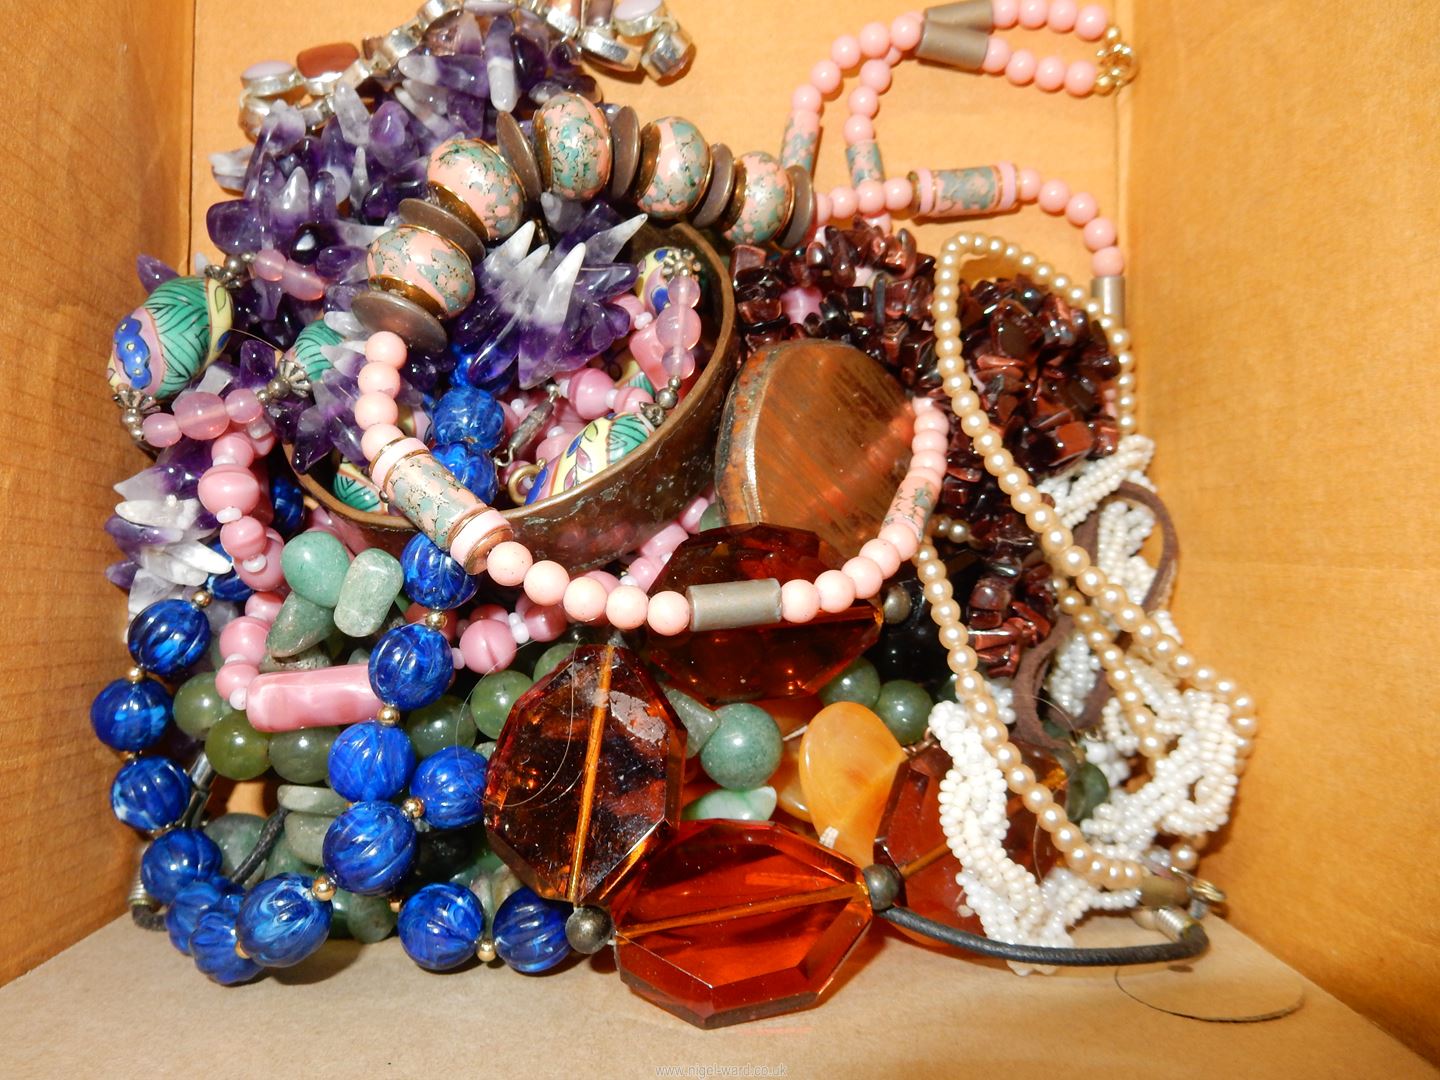 A box of costume jewellery including stone necklaces (amethyst, etc.), bracelets, etc. - Image 2 of 2